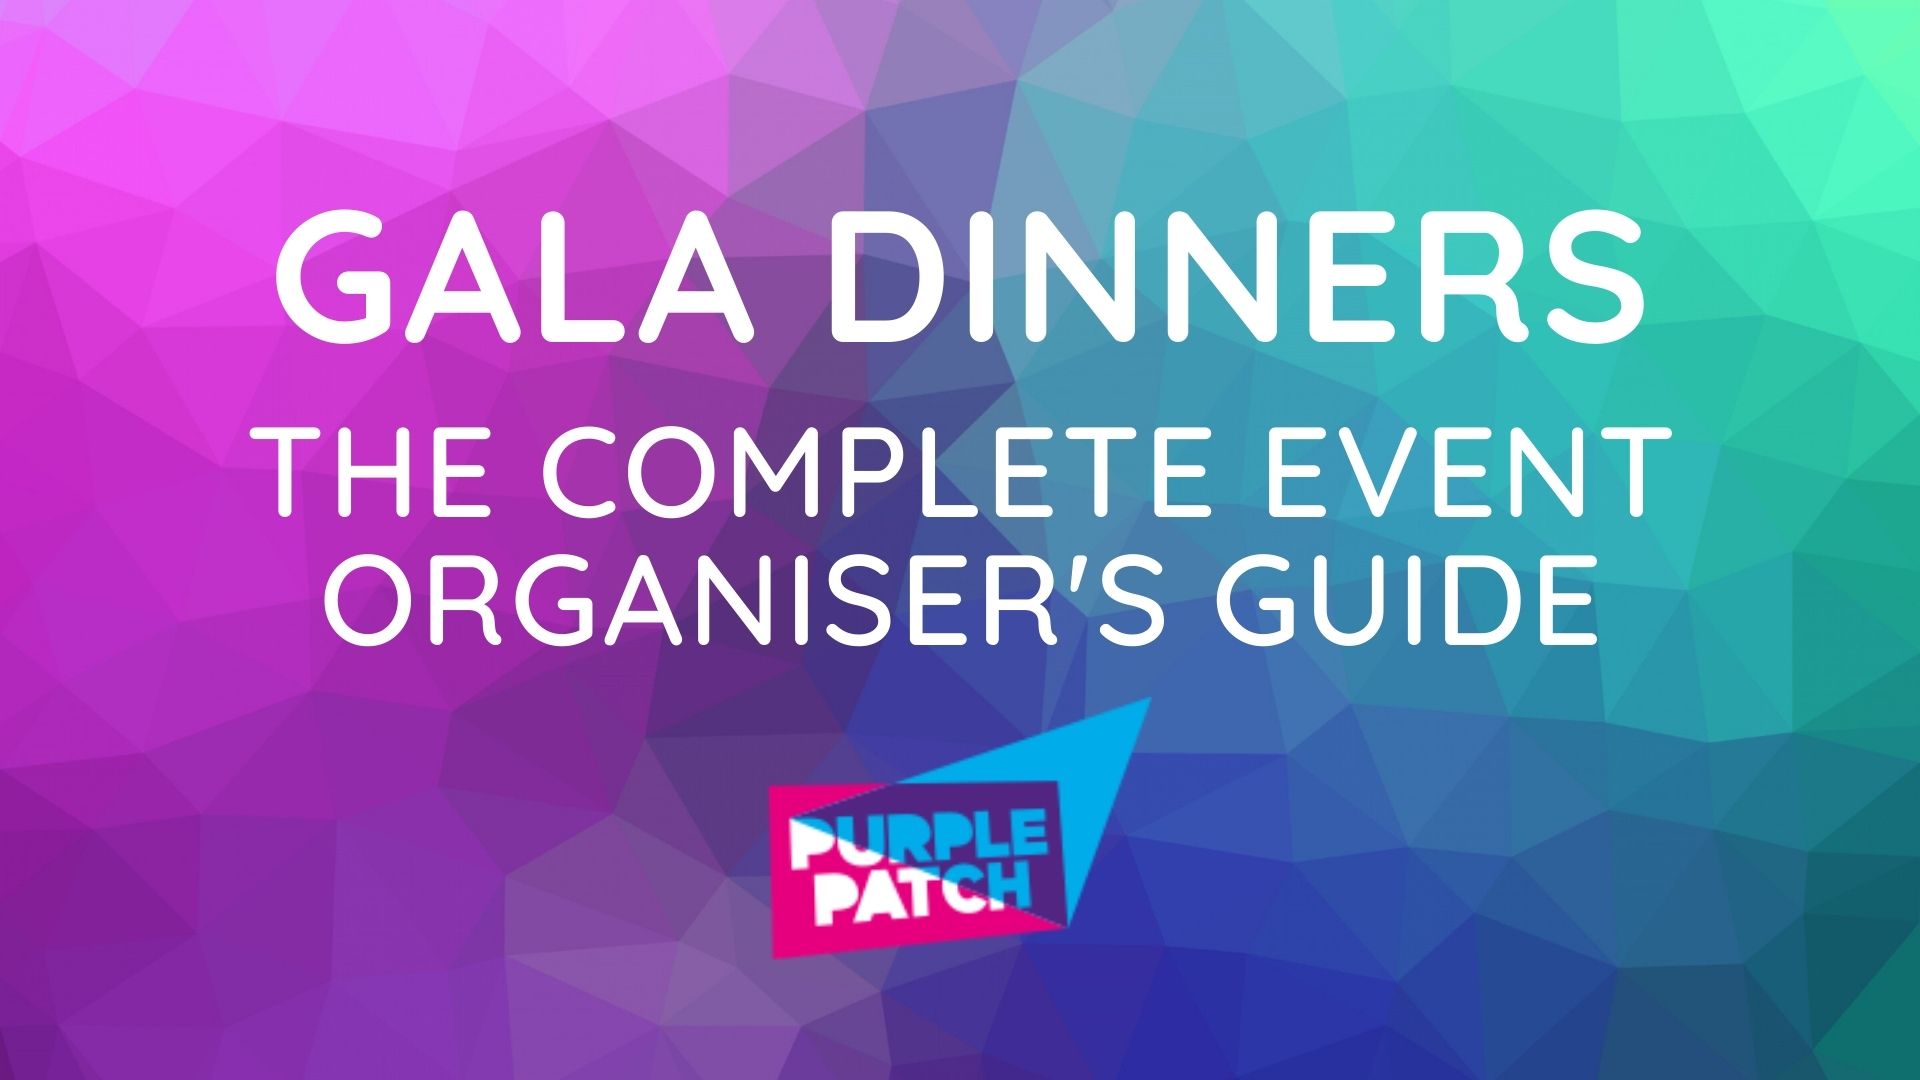 Gala Dinners: The Complete Event Organiser's Guide